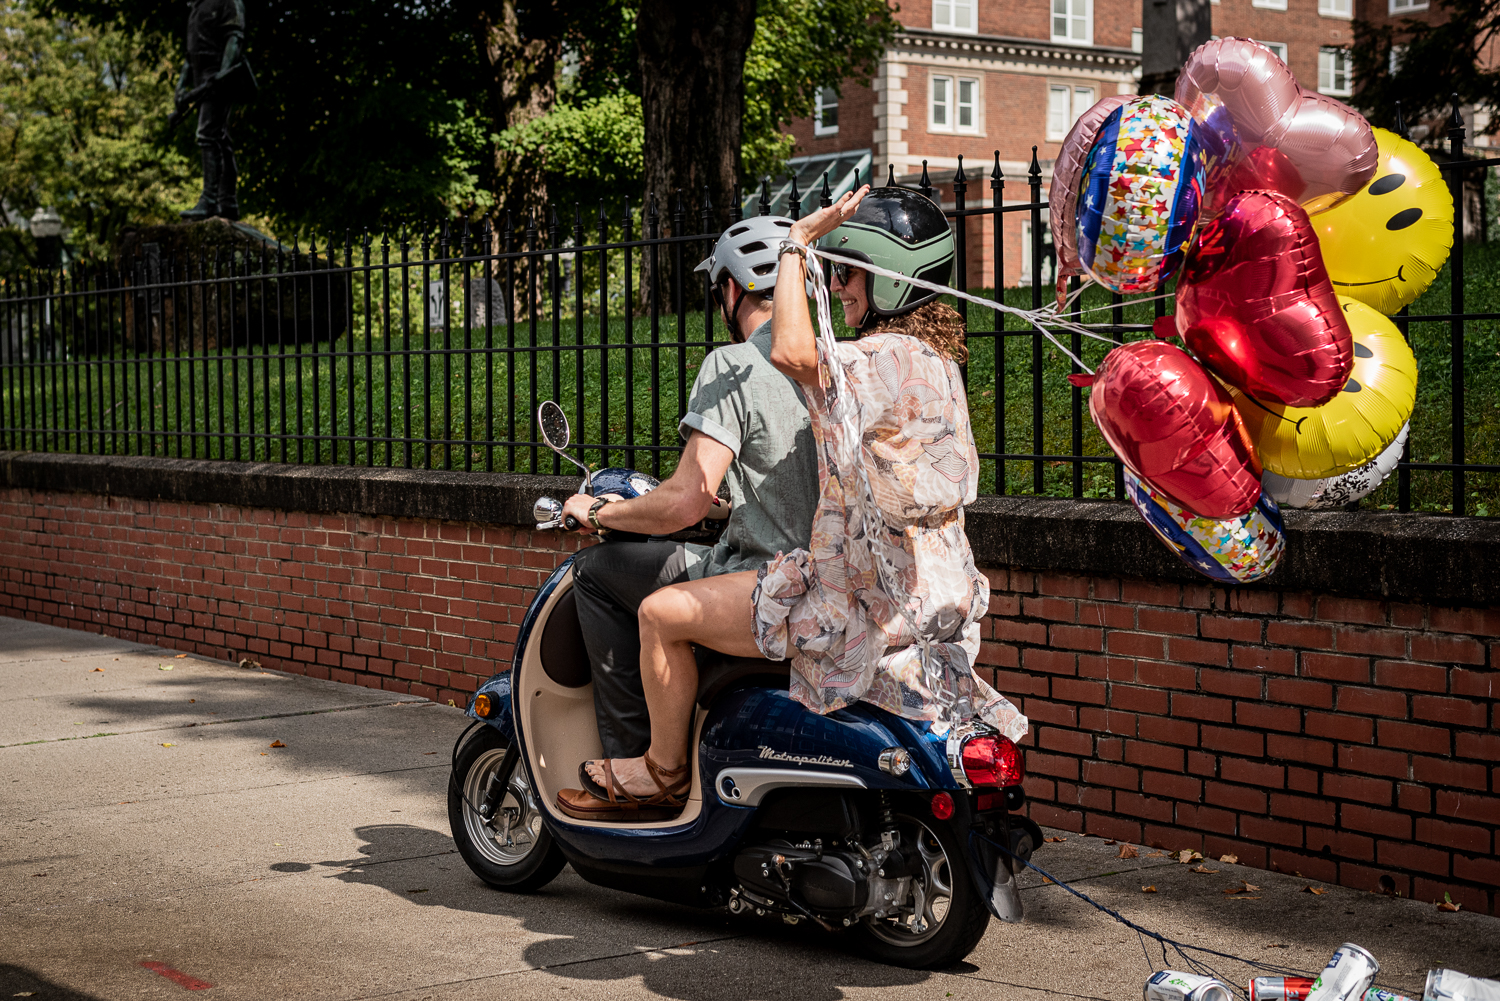 A newly married couple ride away on a scooter with balloons.